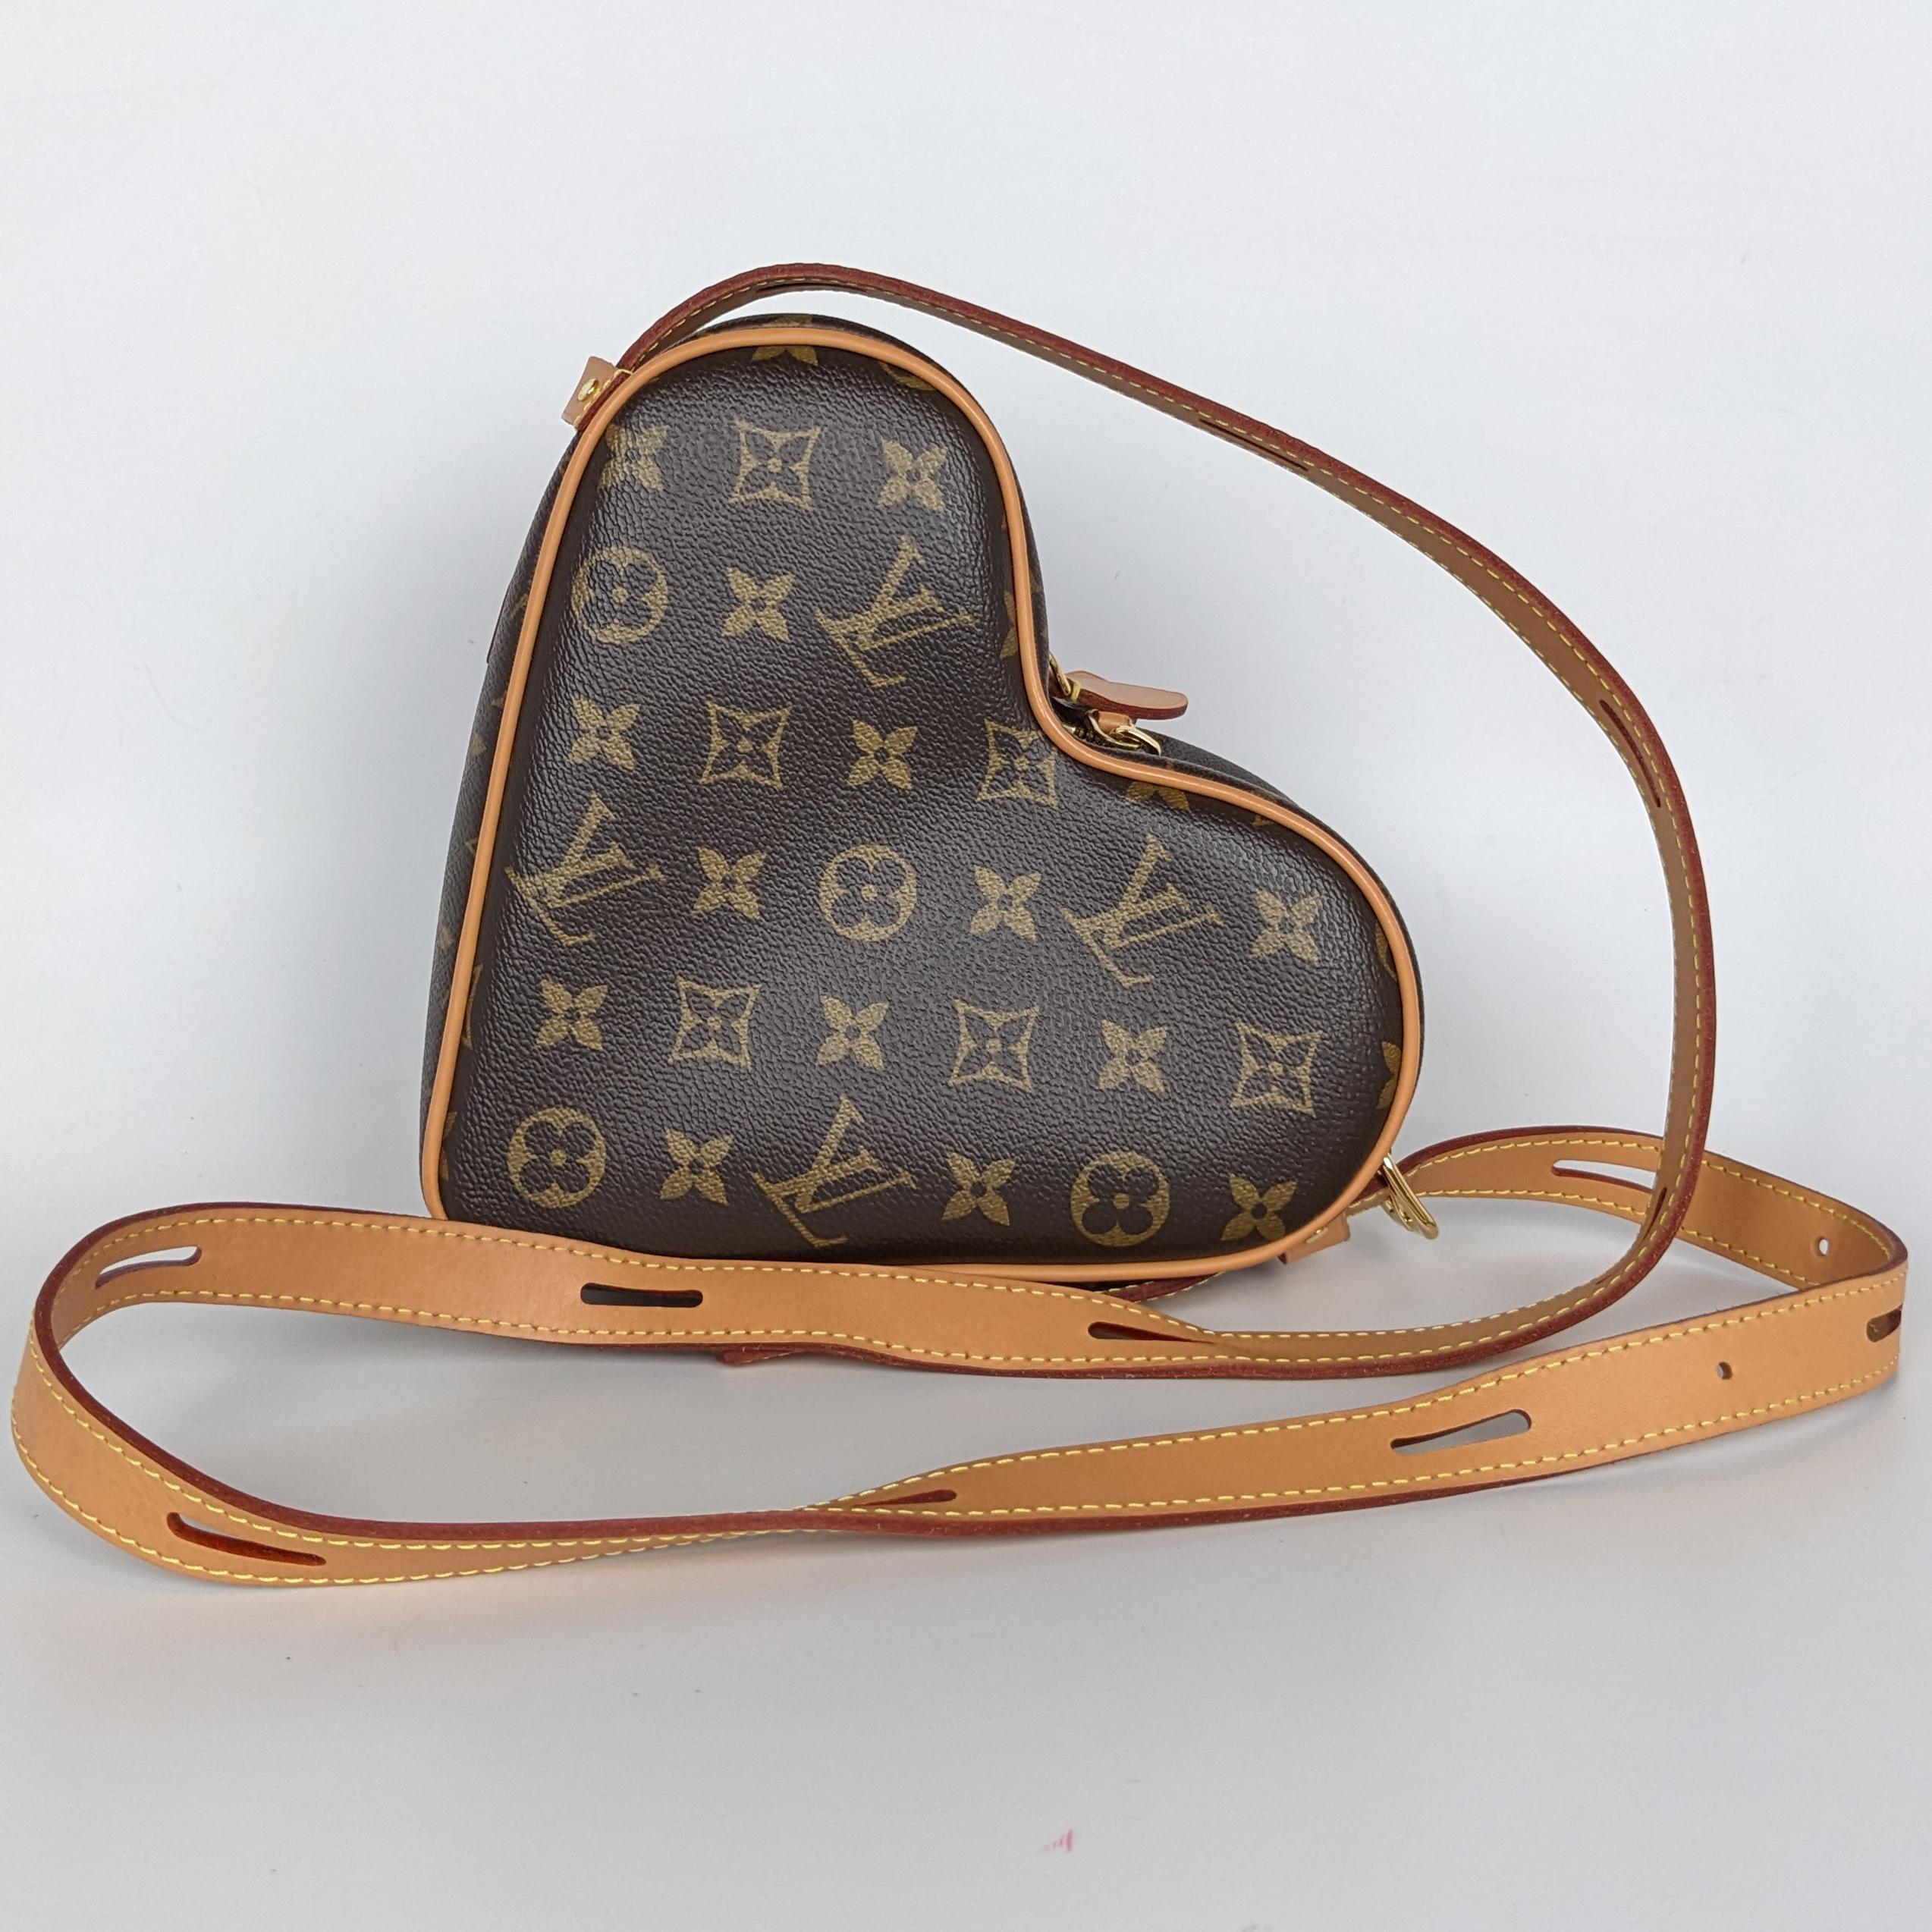 Condition: This authentic Louis Vuitton bag is in great pre-loved condition. There are light marks and wrinkling on the vachetta leather. 

No accessories included (dust bag, box, etc.)

Features: Top zipper and an adjustable crossbody strap. The